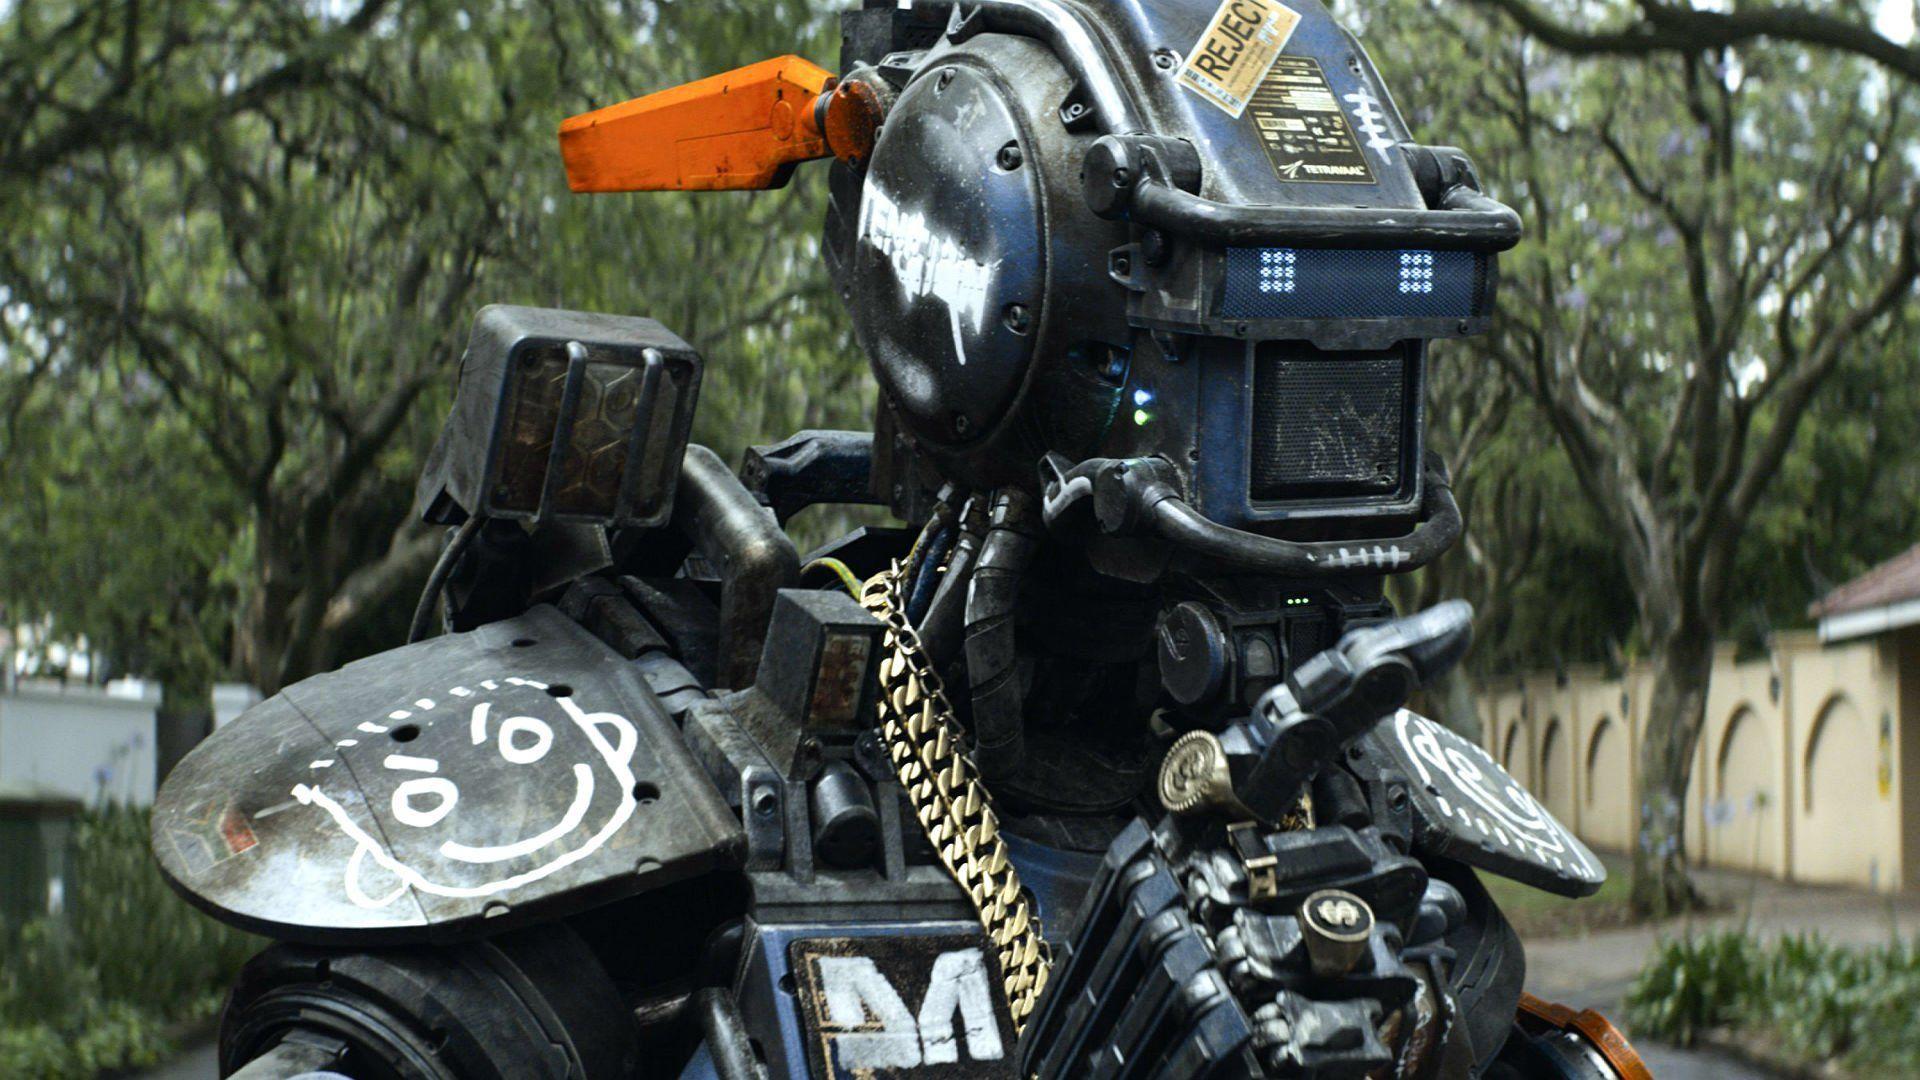 CHAPPIE Sci Fi Futuristic Action Thriller Robot Cyborg Action